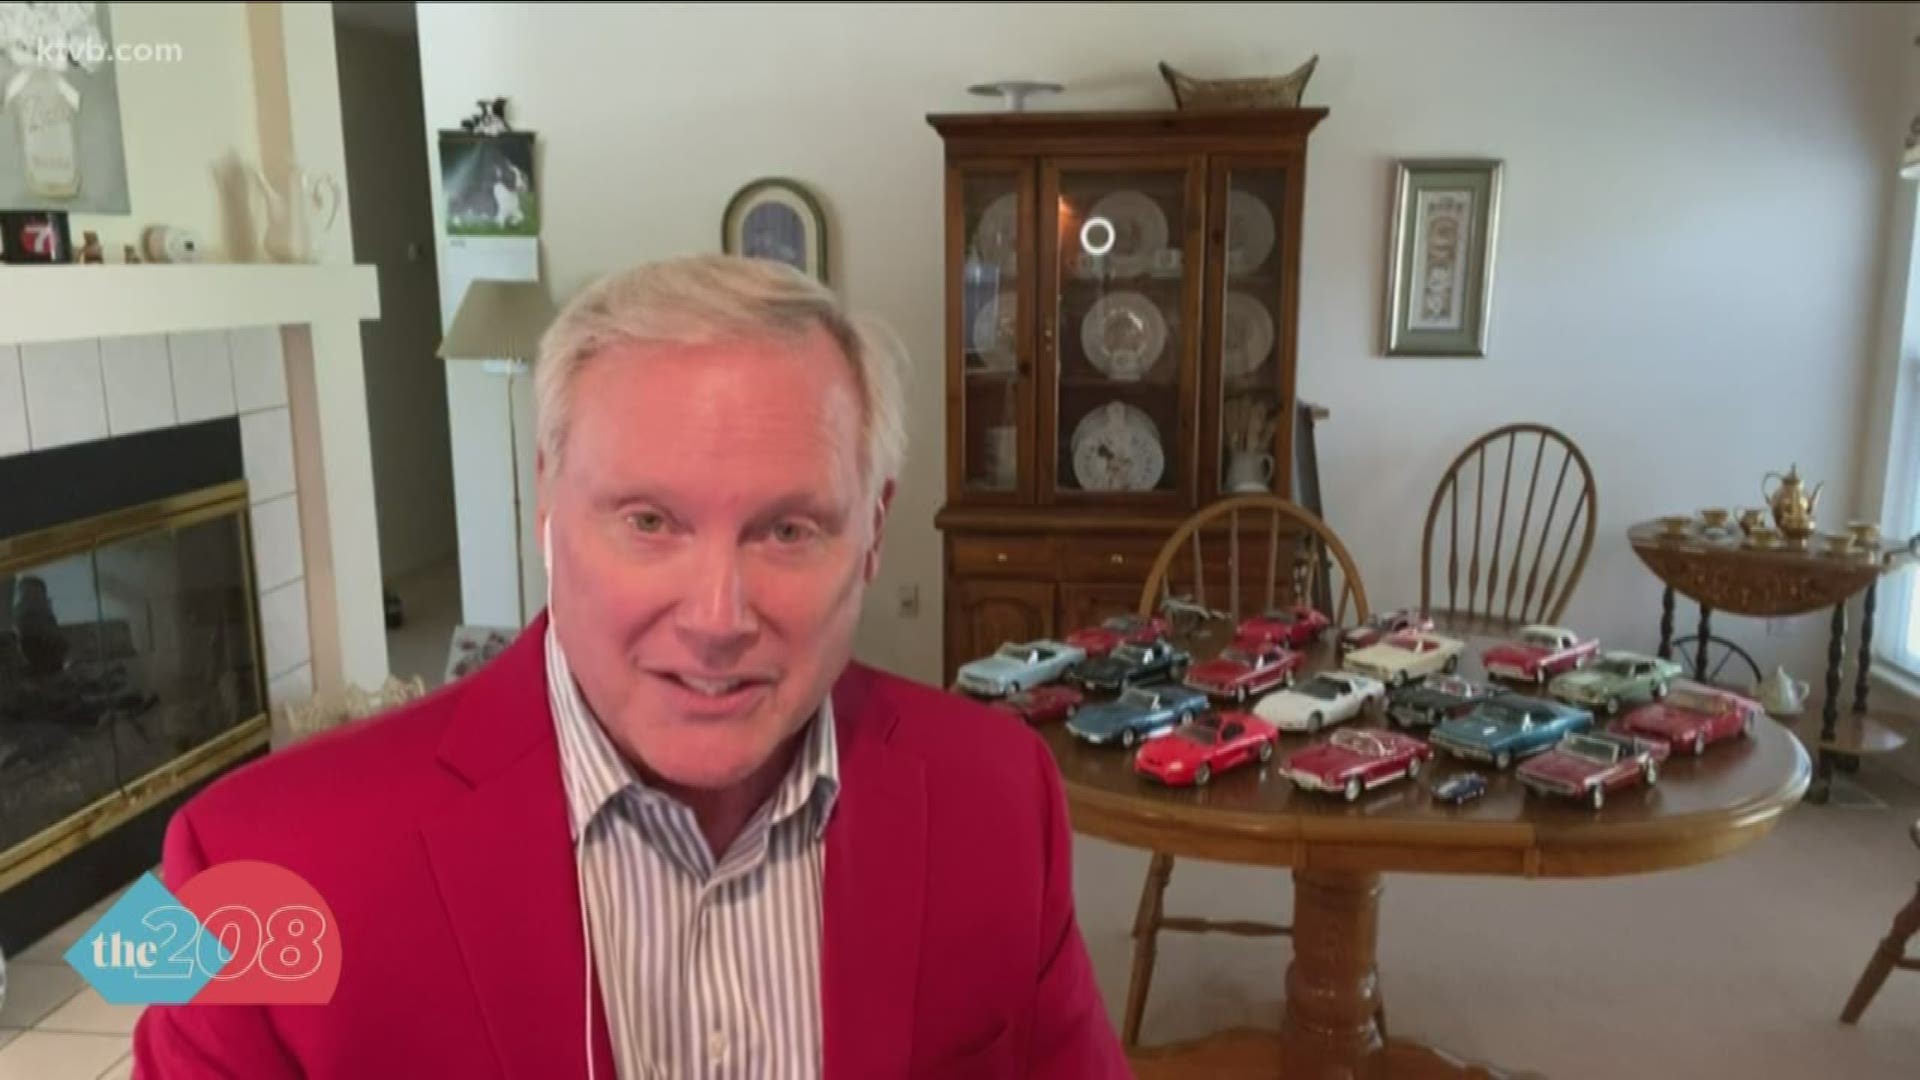 We go to Idaho's chief meteorologist for an explanation about the changing model cars on his desk.